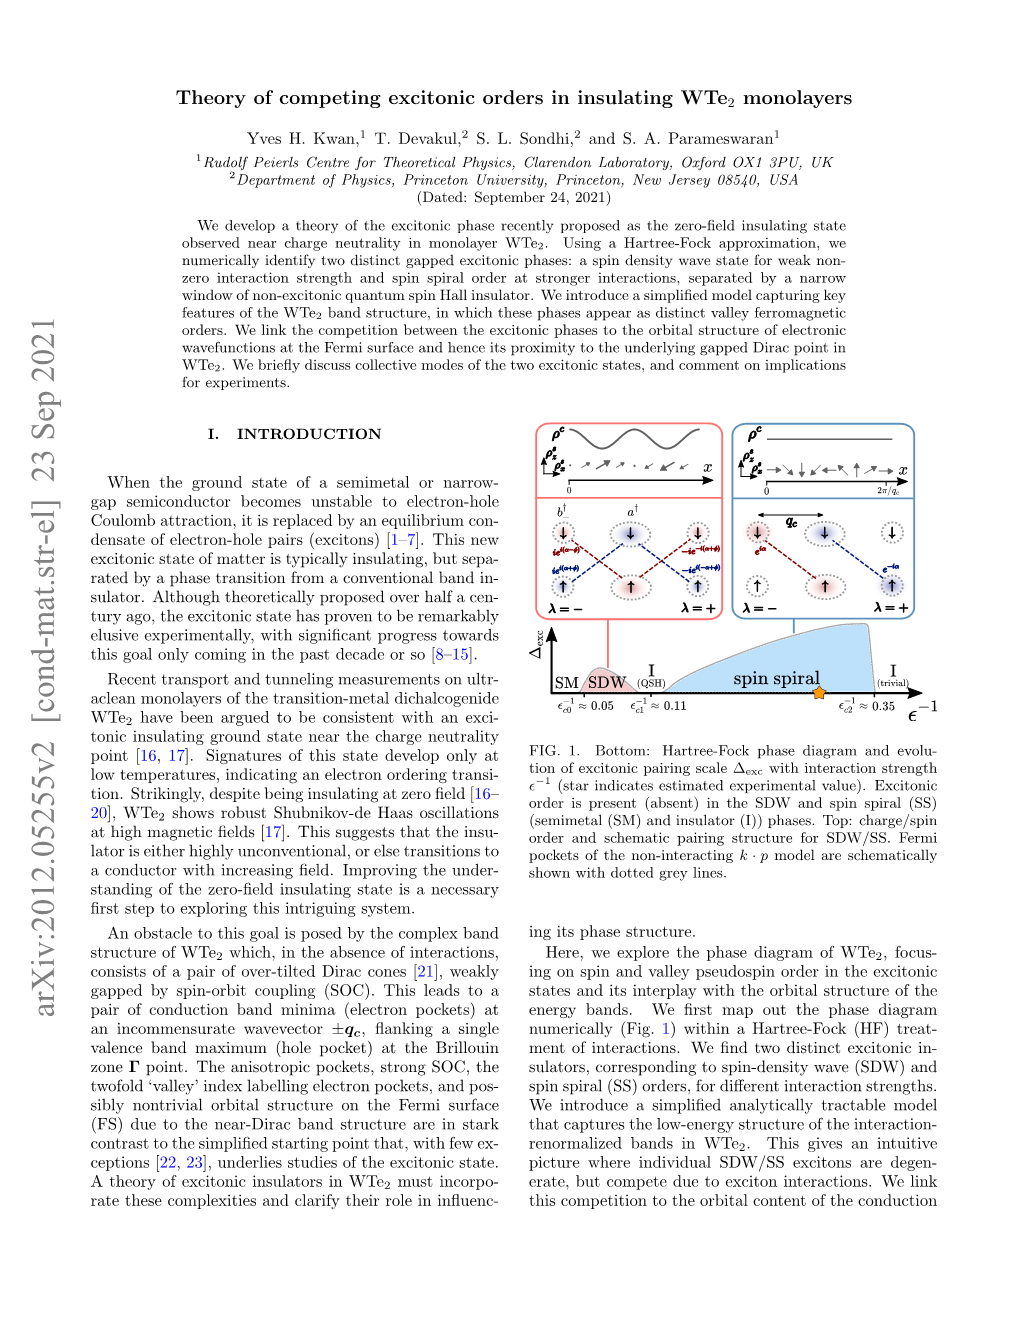 Theory of Competing Excitonic Orders in Insulating Wte $ 2 $ Monolayers